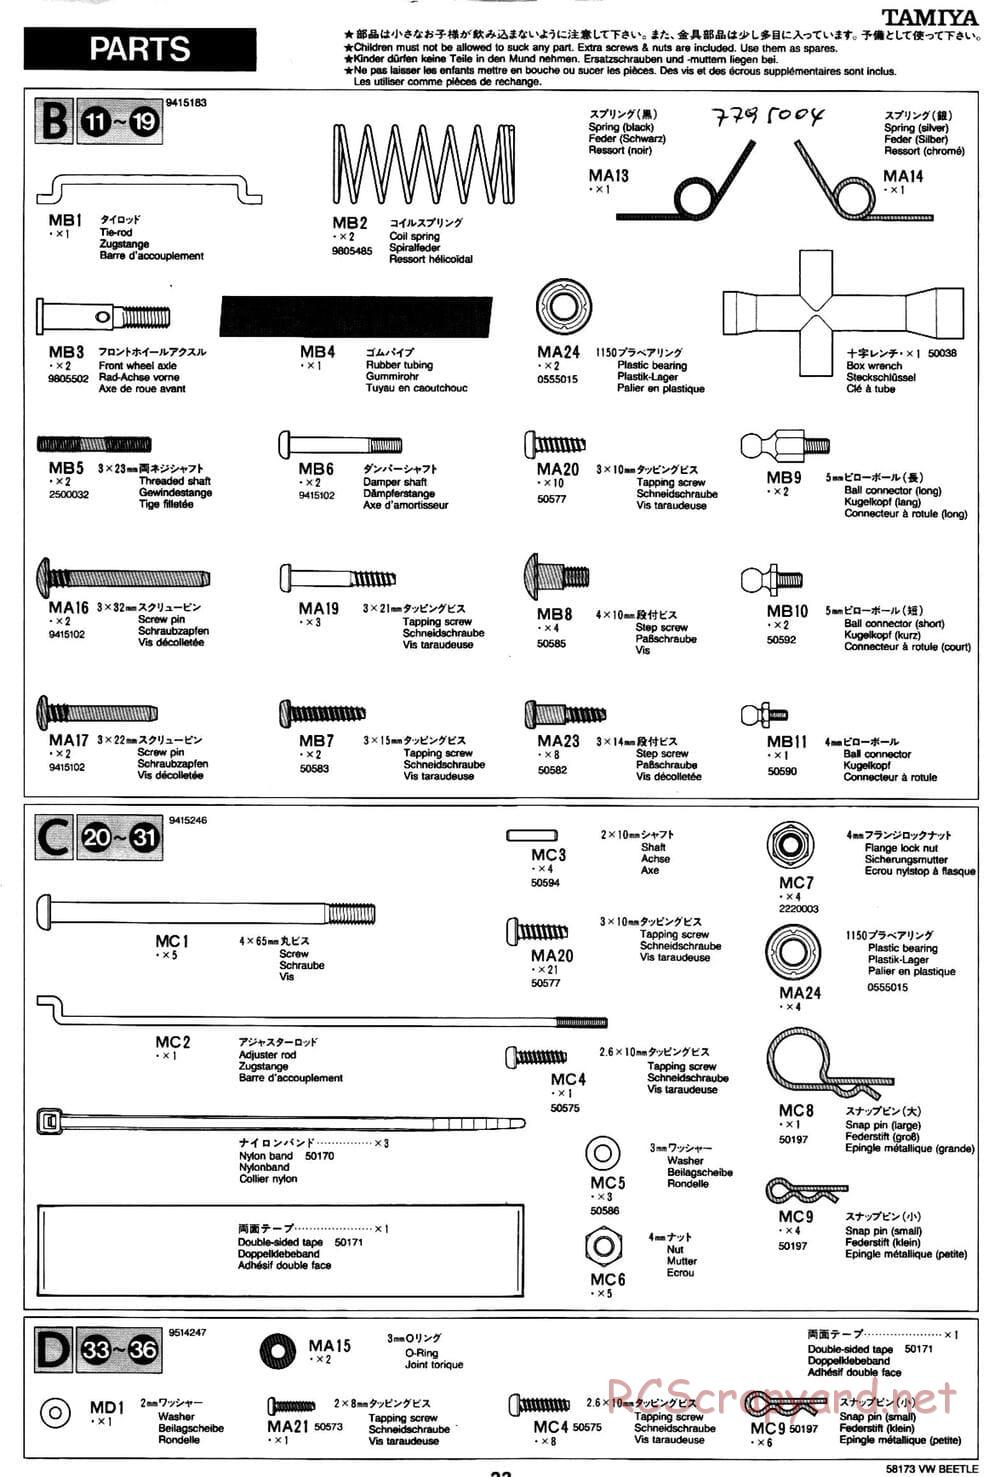 Tamiya - Volkswagen Beetle - M02L Chassis - Manual - Page 23